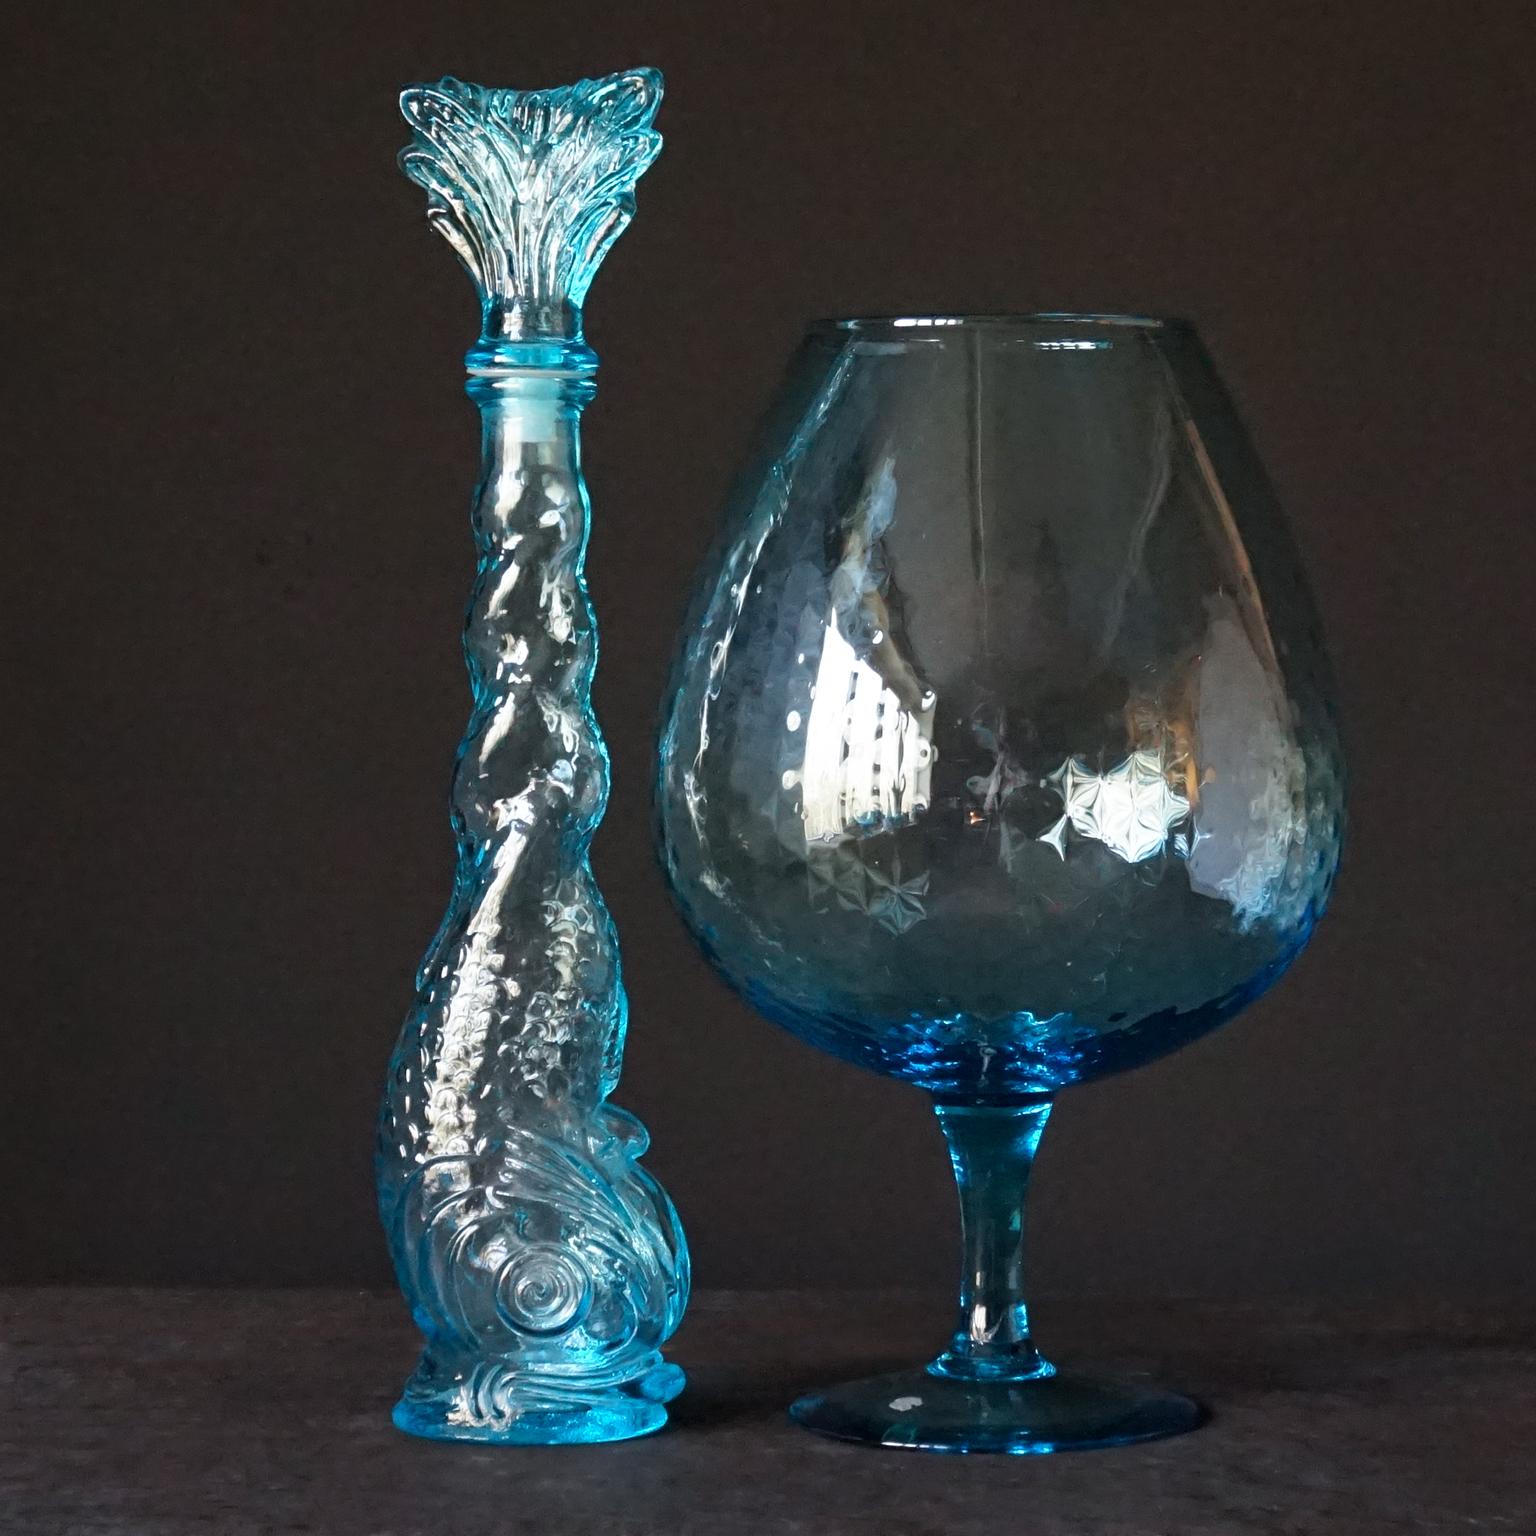 Glass Ten MCM 1960s Teal Blue Italian Empoli Genie Bottles, Vases and Apothecary Jars For Sale